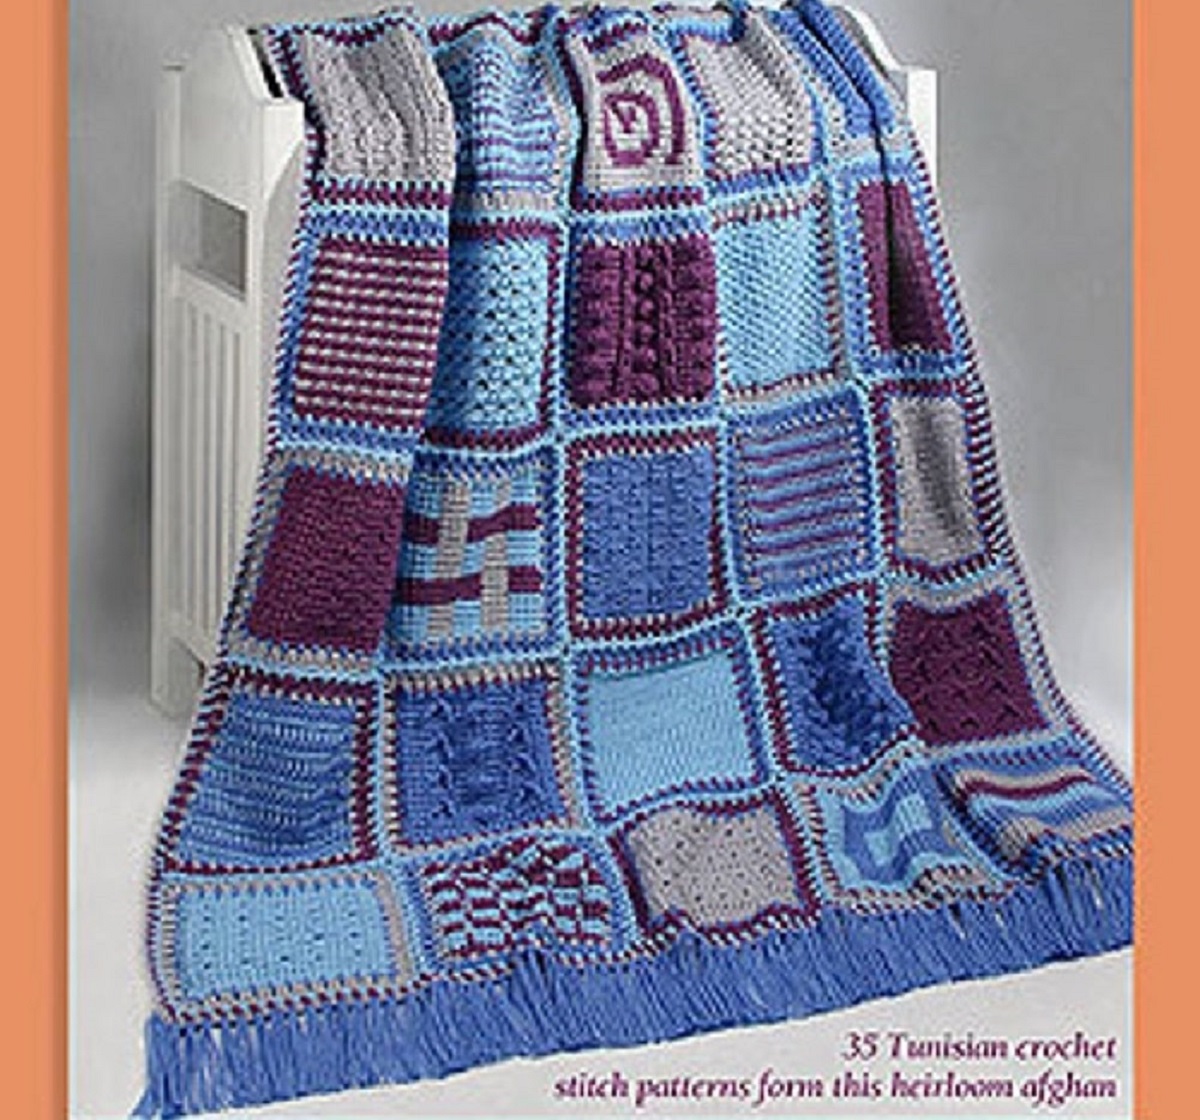 Blue and purple patchwork style crochet Afghan with long blue tassels along the bottom draped over a white crib.